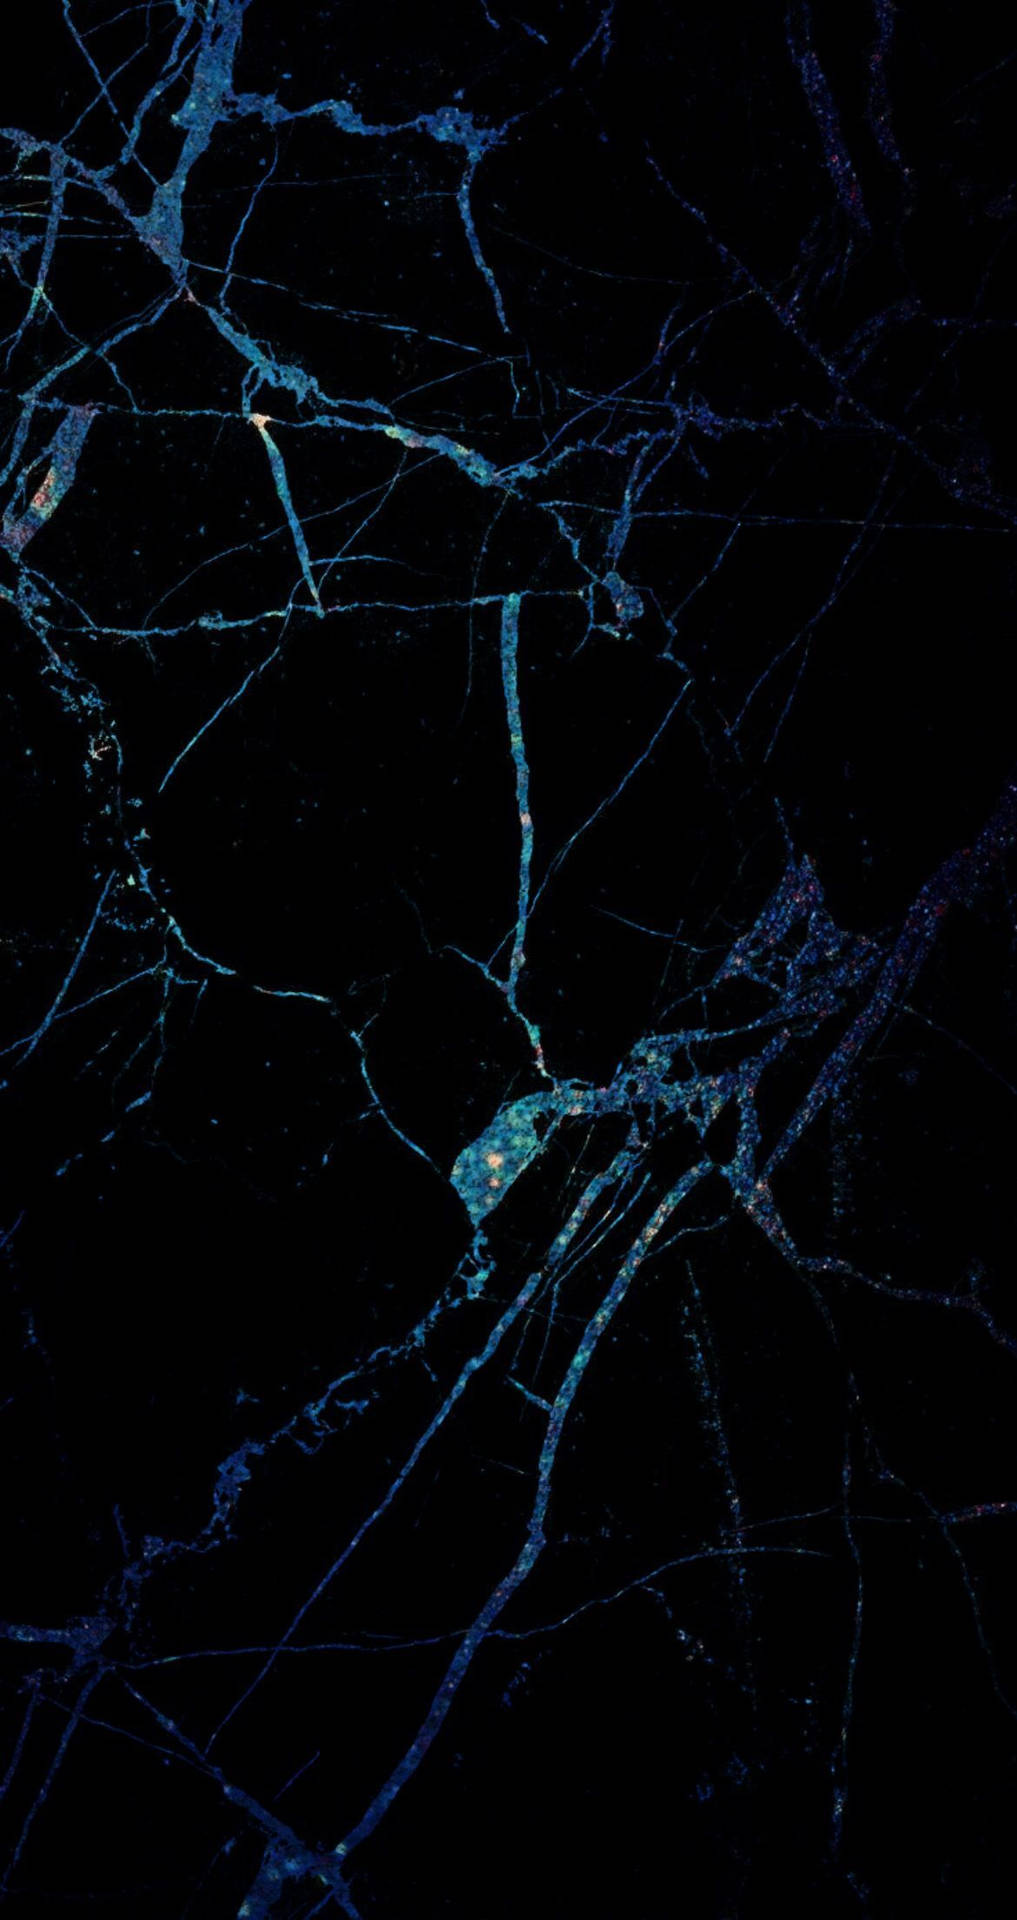 Explore the luxurious black marbling of this 4K-resolution wallpaper. Wallpaper